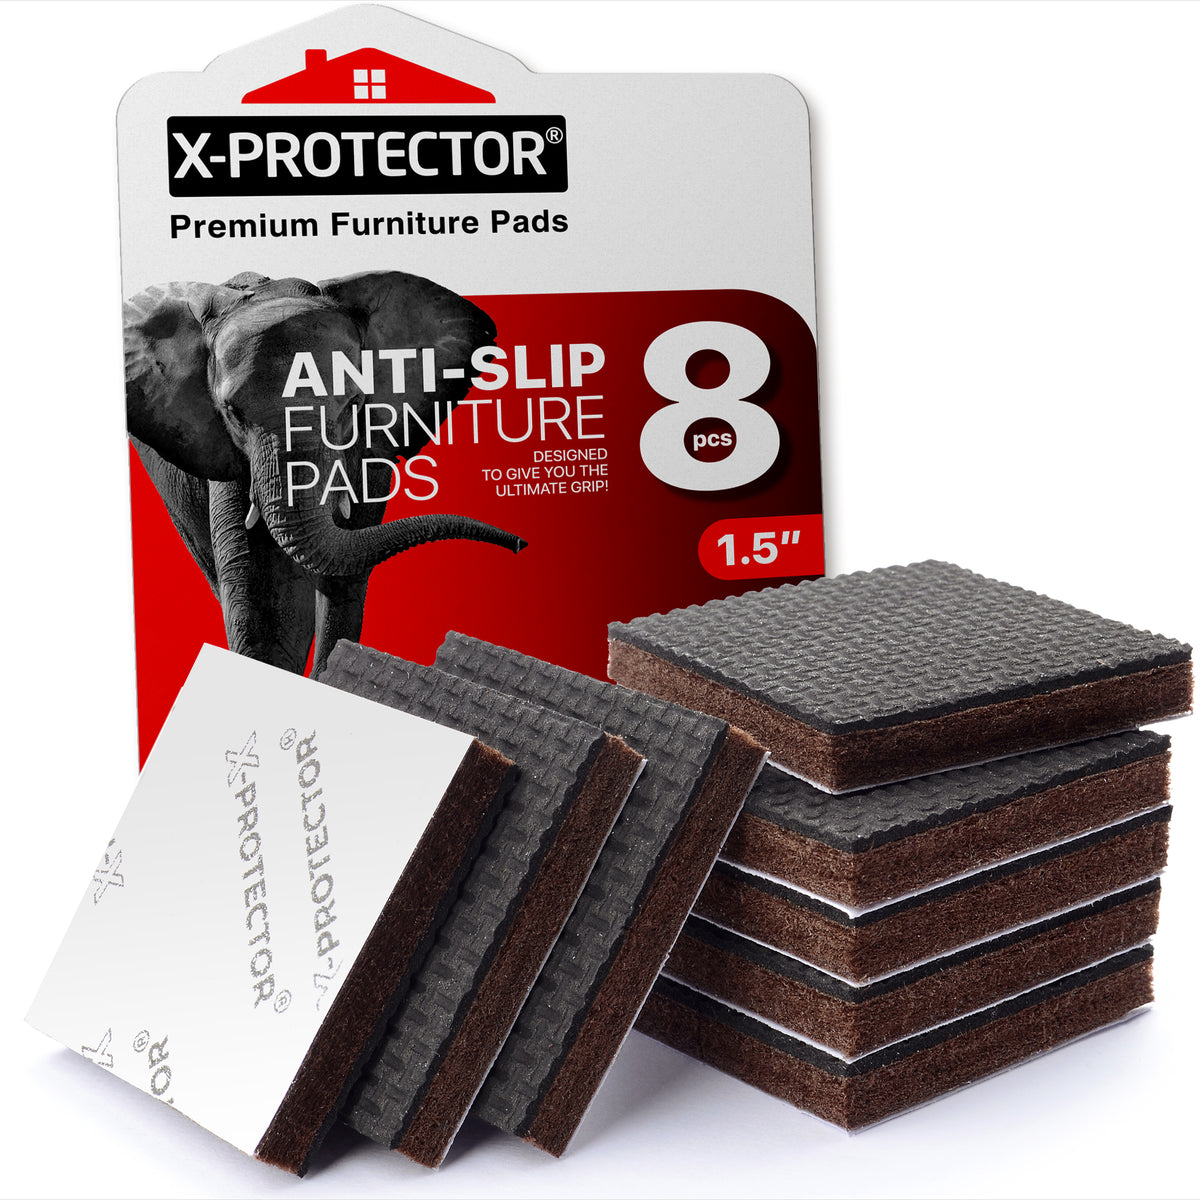 X-PROTECTOR Non Slip Furniture Pads - Premium 16 pcs 2 Furniture Grippers!  Best SelfAdhesive Rubber Feet Furniture Feet - Ideal Non Skid Furniture Pad  Floor Protectors for Fix in Place Furniture 